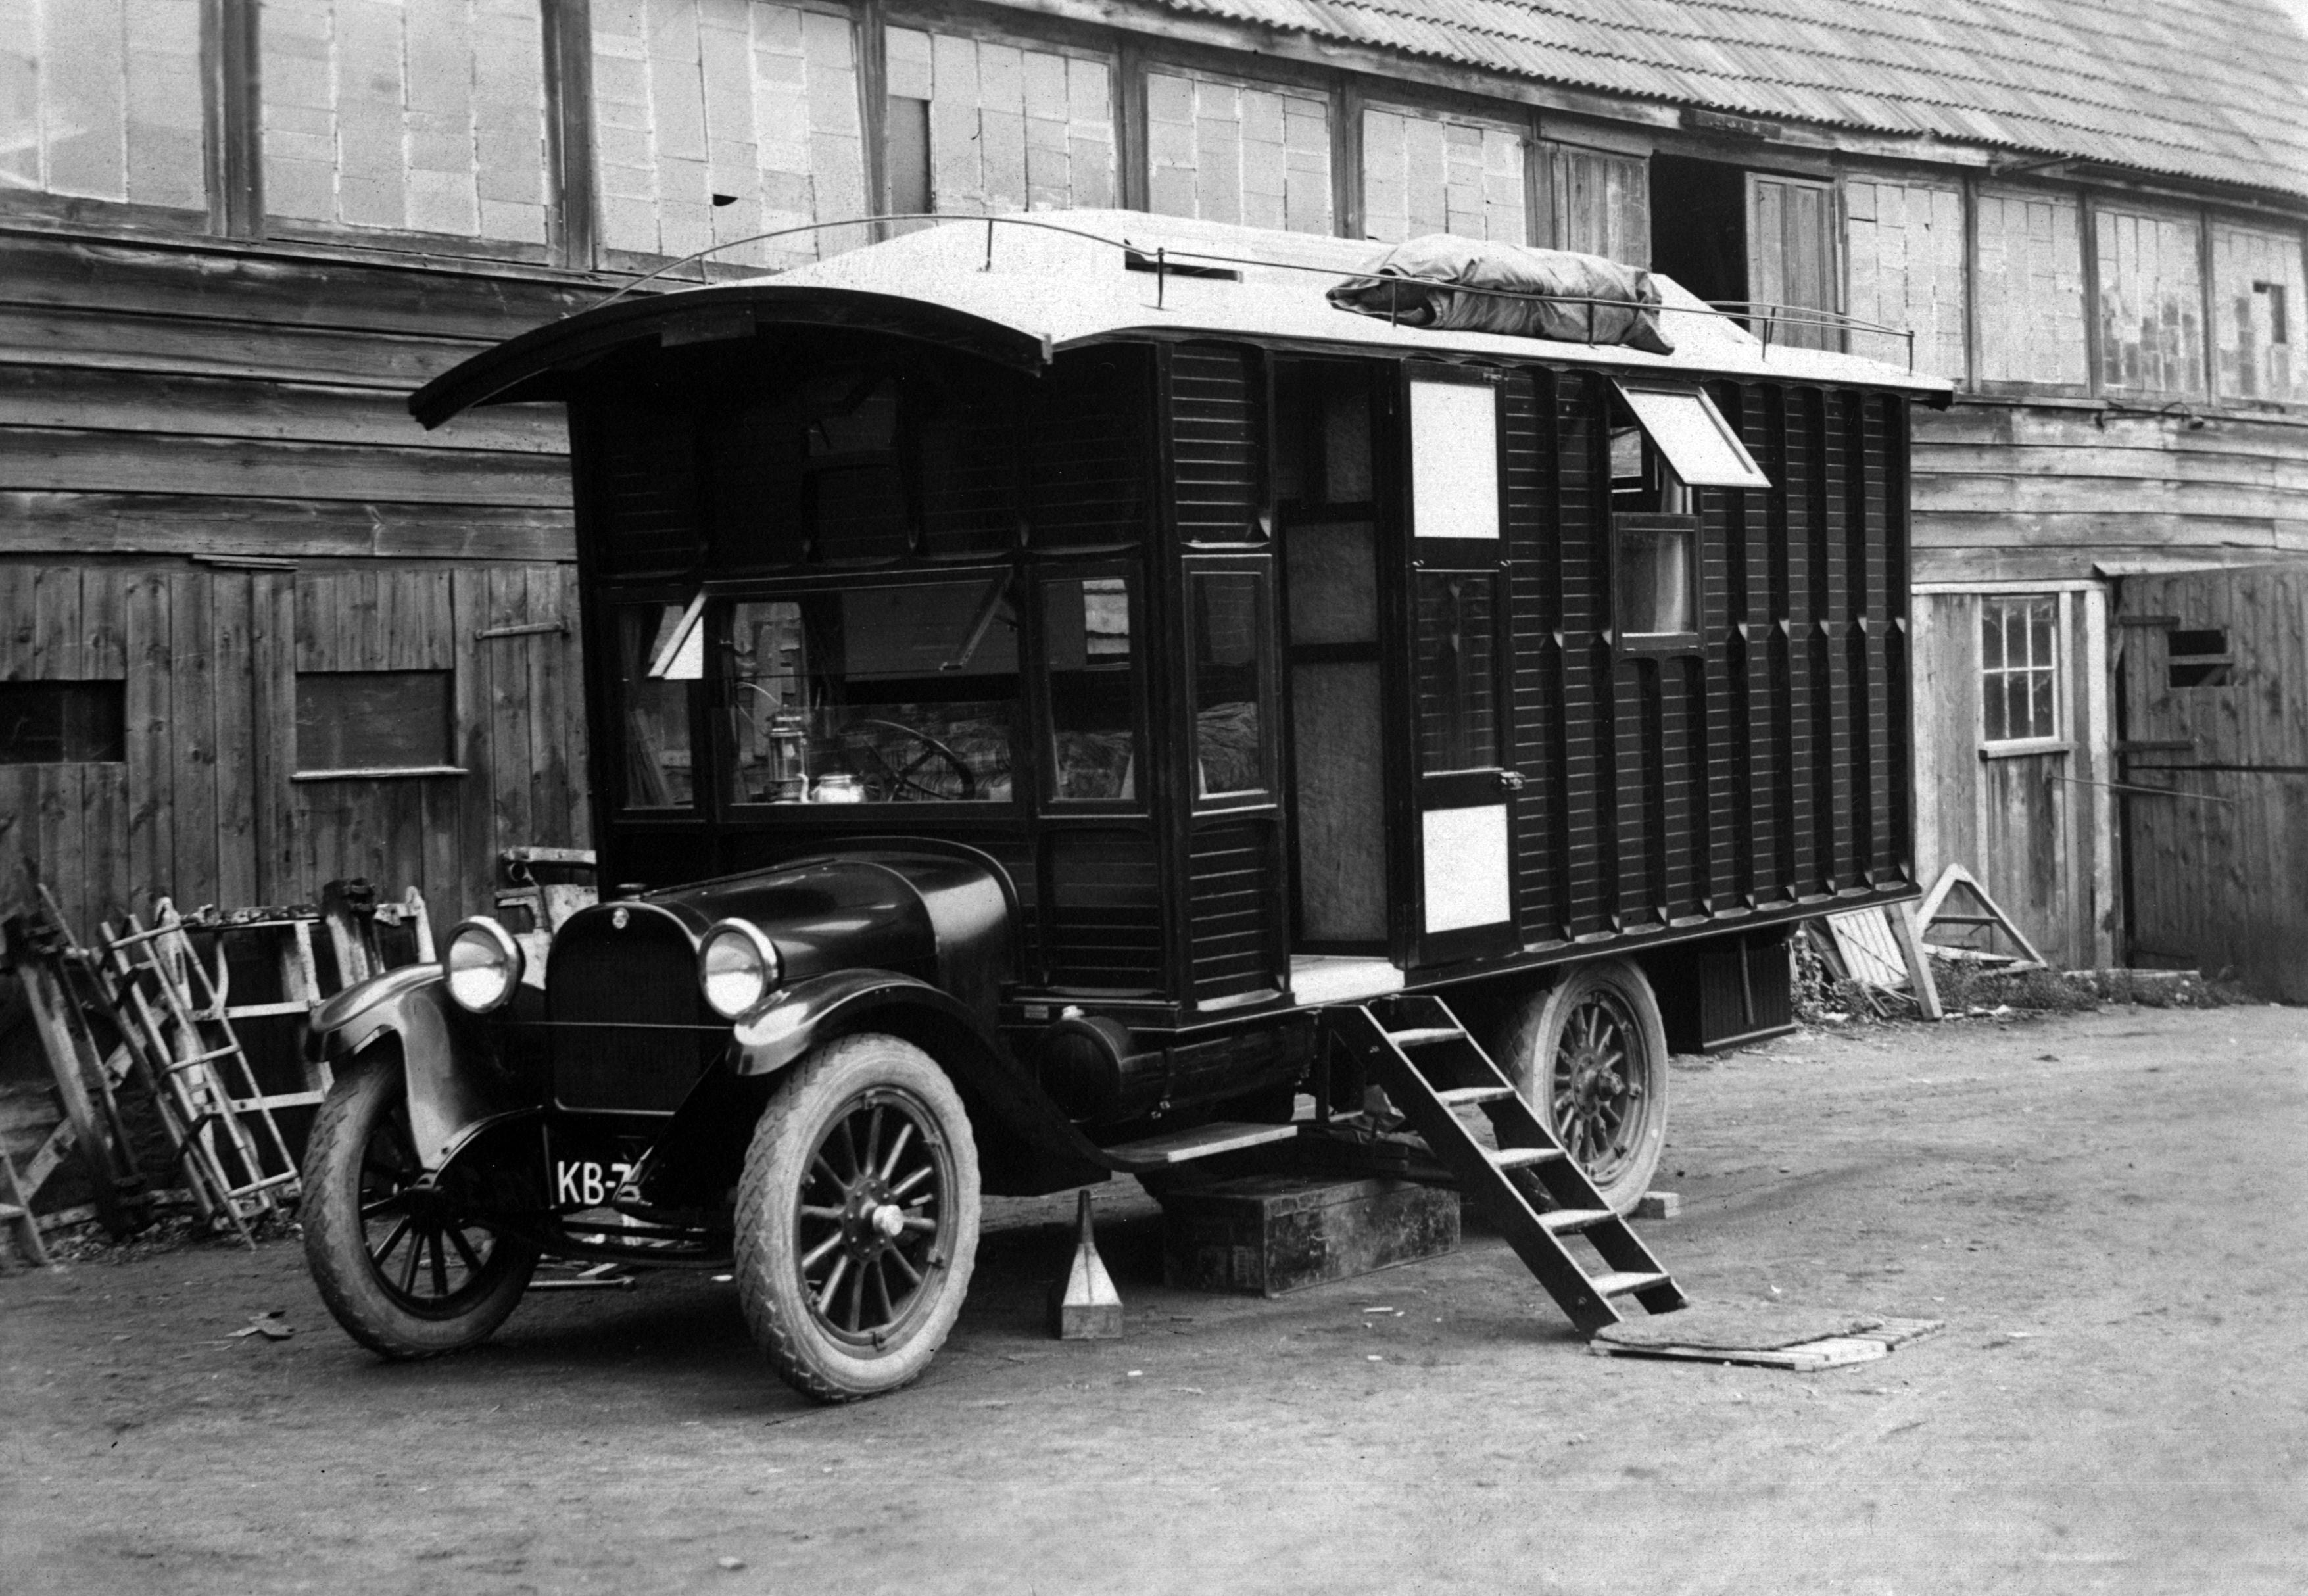 A covered wagon–type trailer car with a small ladder on the side